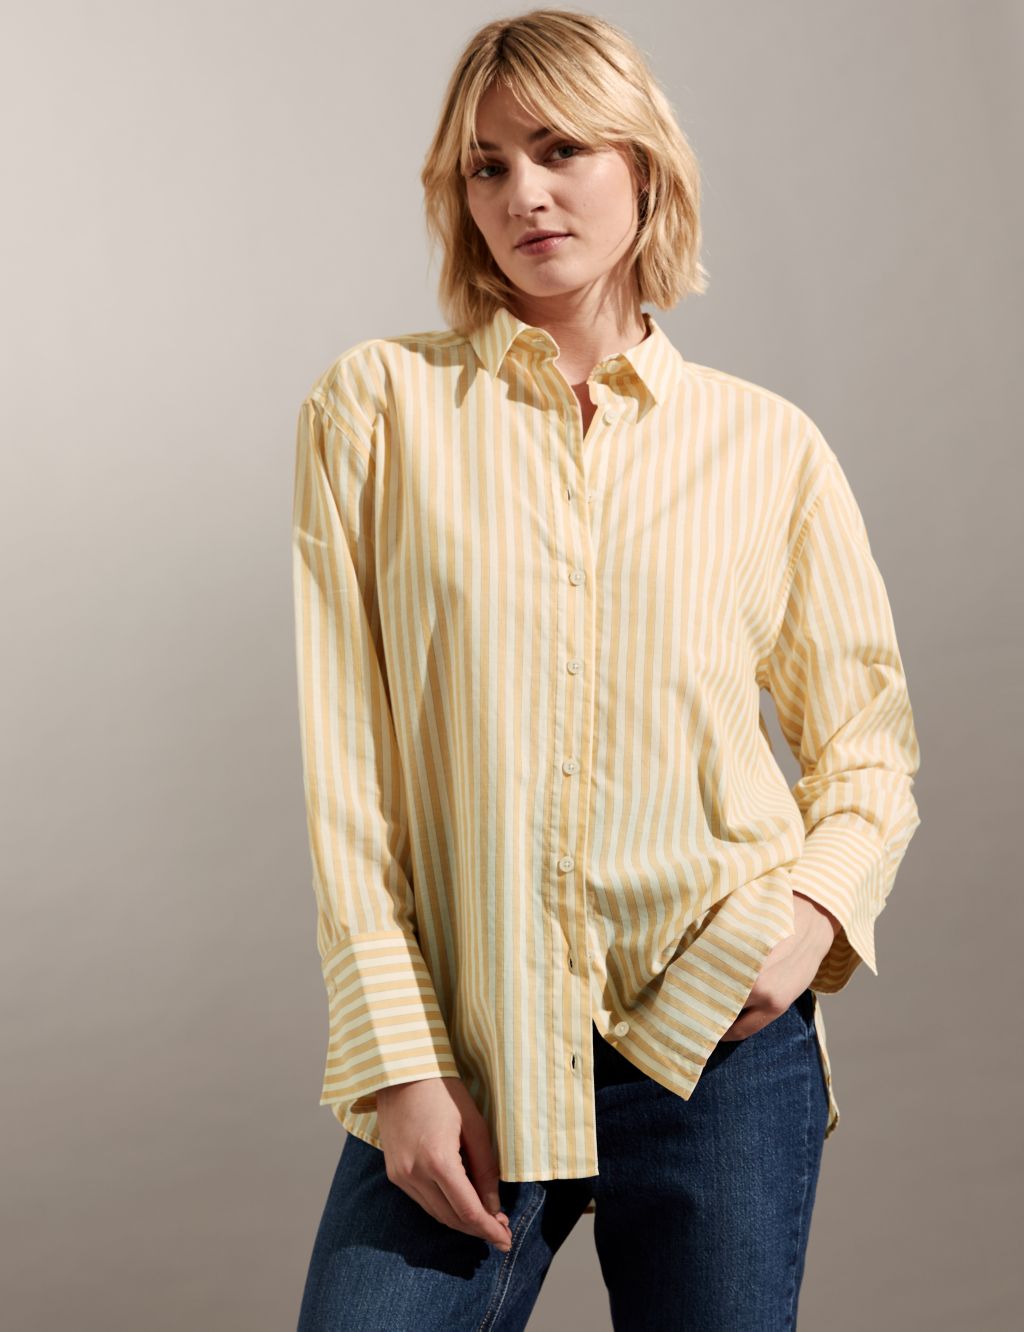 Pure Cotton Striped Collared Shirt image 2